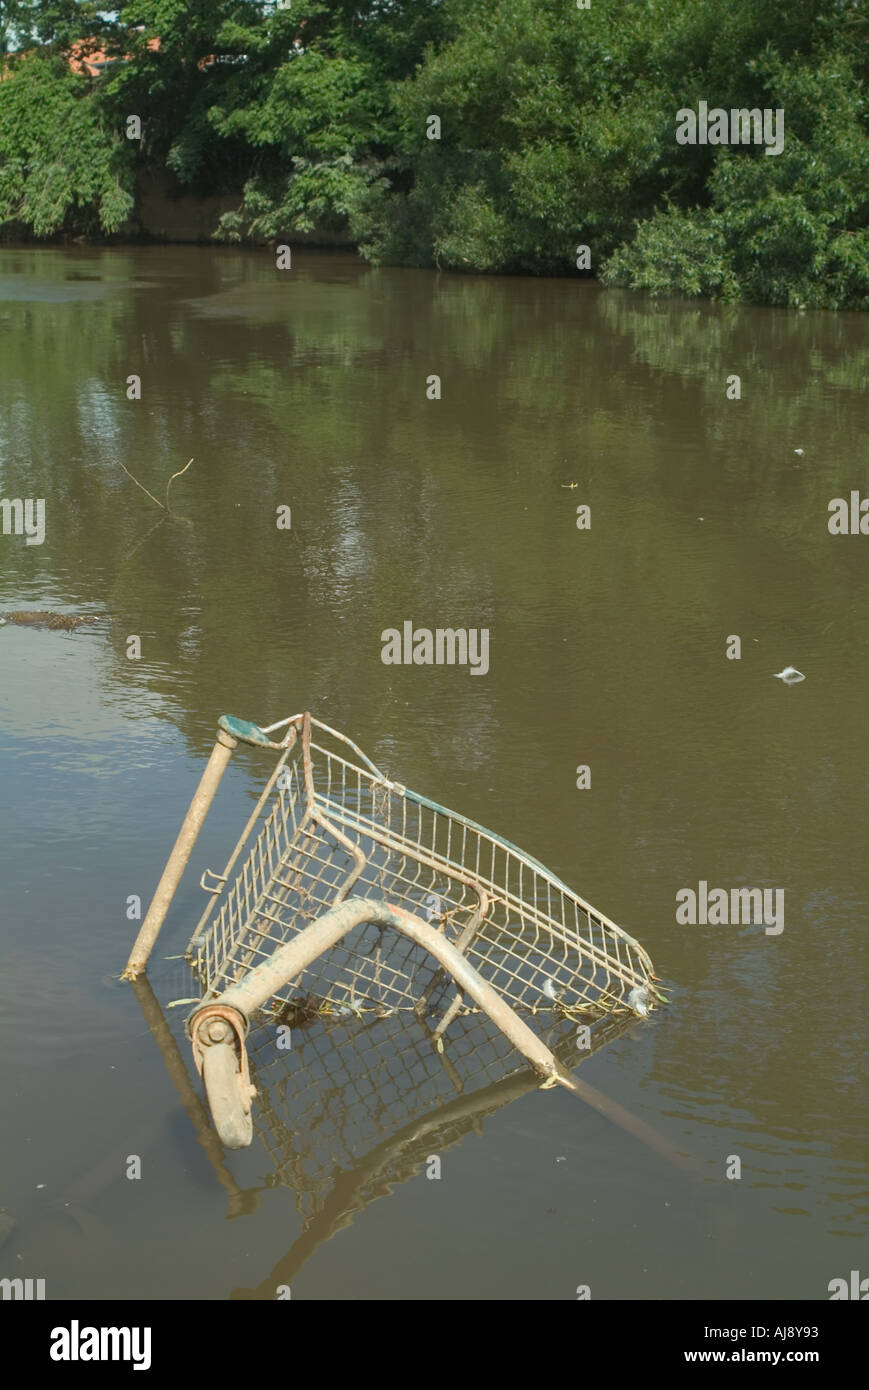 Abandoned shopping trolley in the River Derwent at Malton North Yorkshire Stock Photo